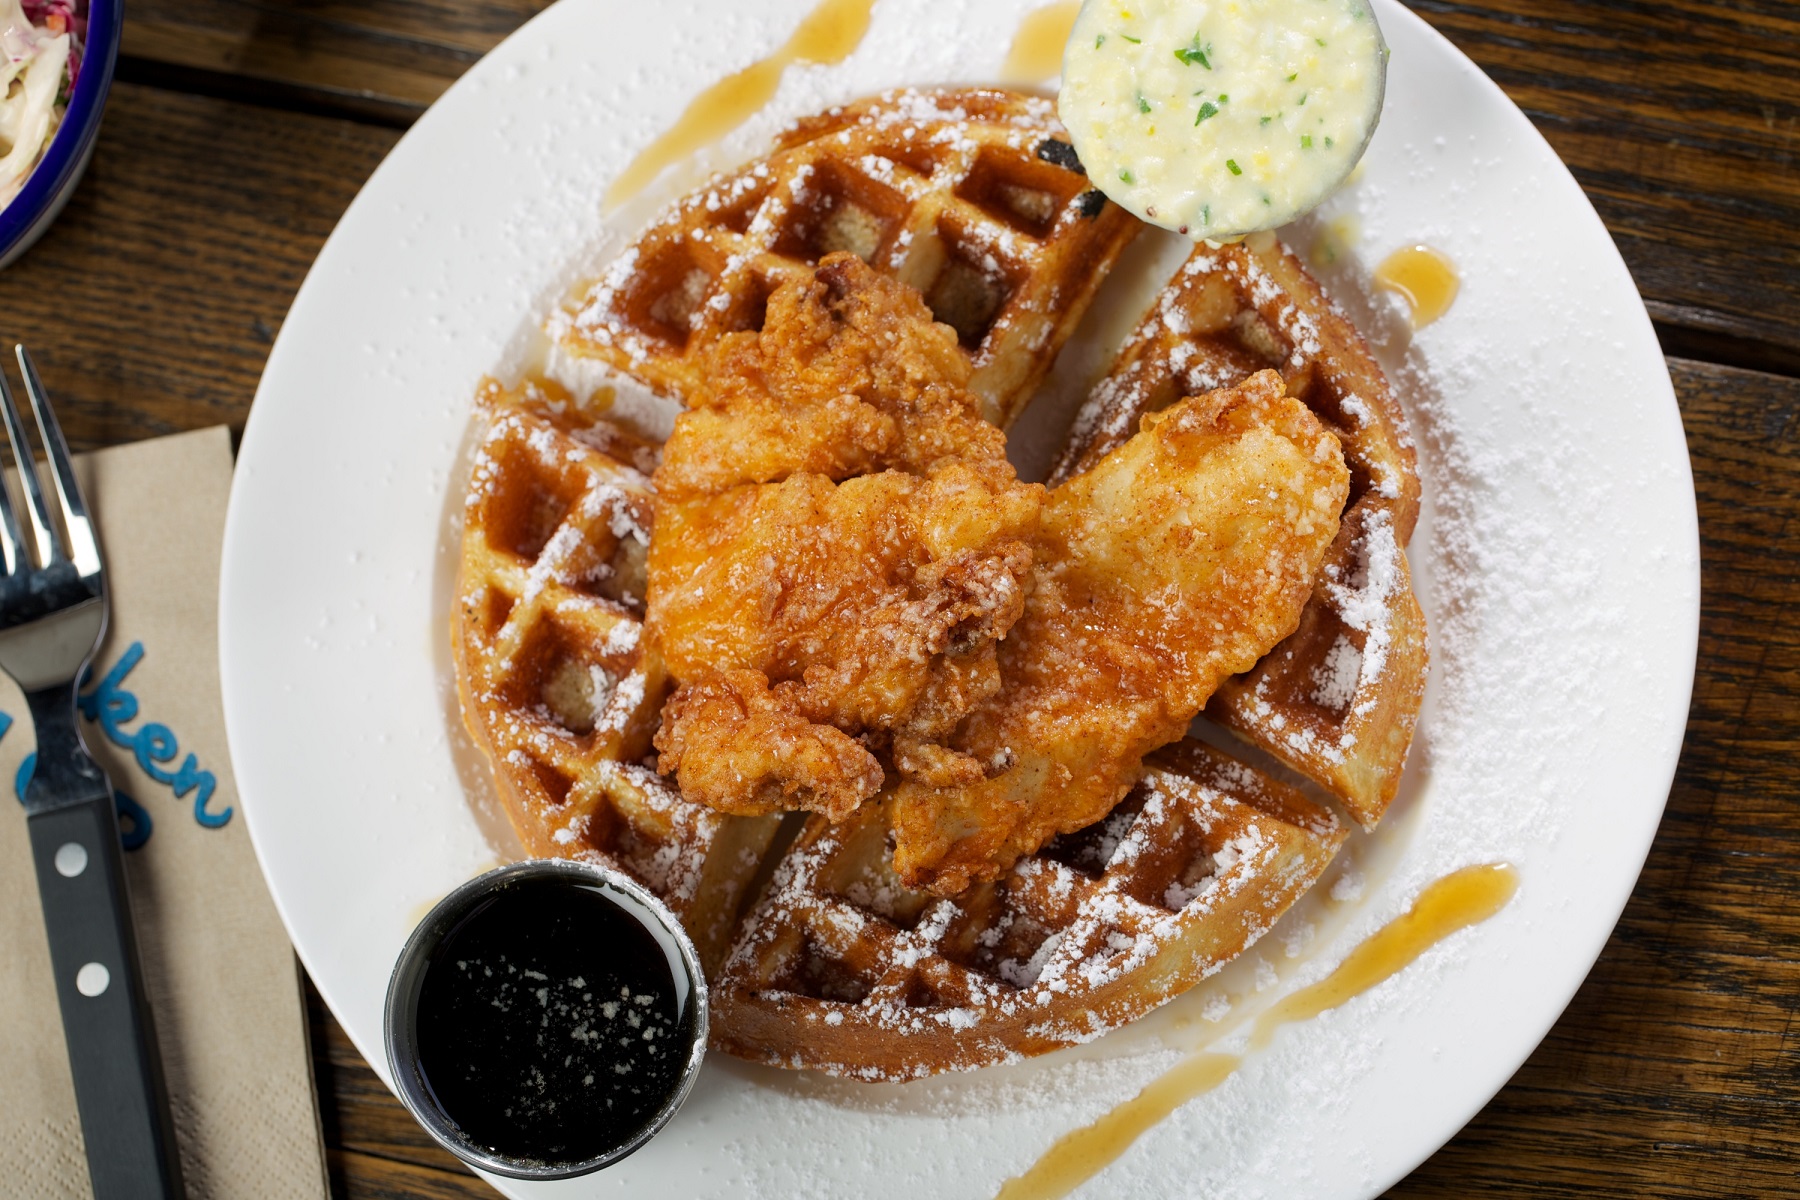 Soho House Chicago_Chicken Shop_Waffles Chicken Dish_photo credit is Dave Burk of Hedrich Blessing